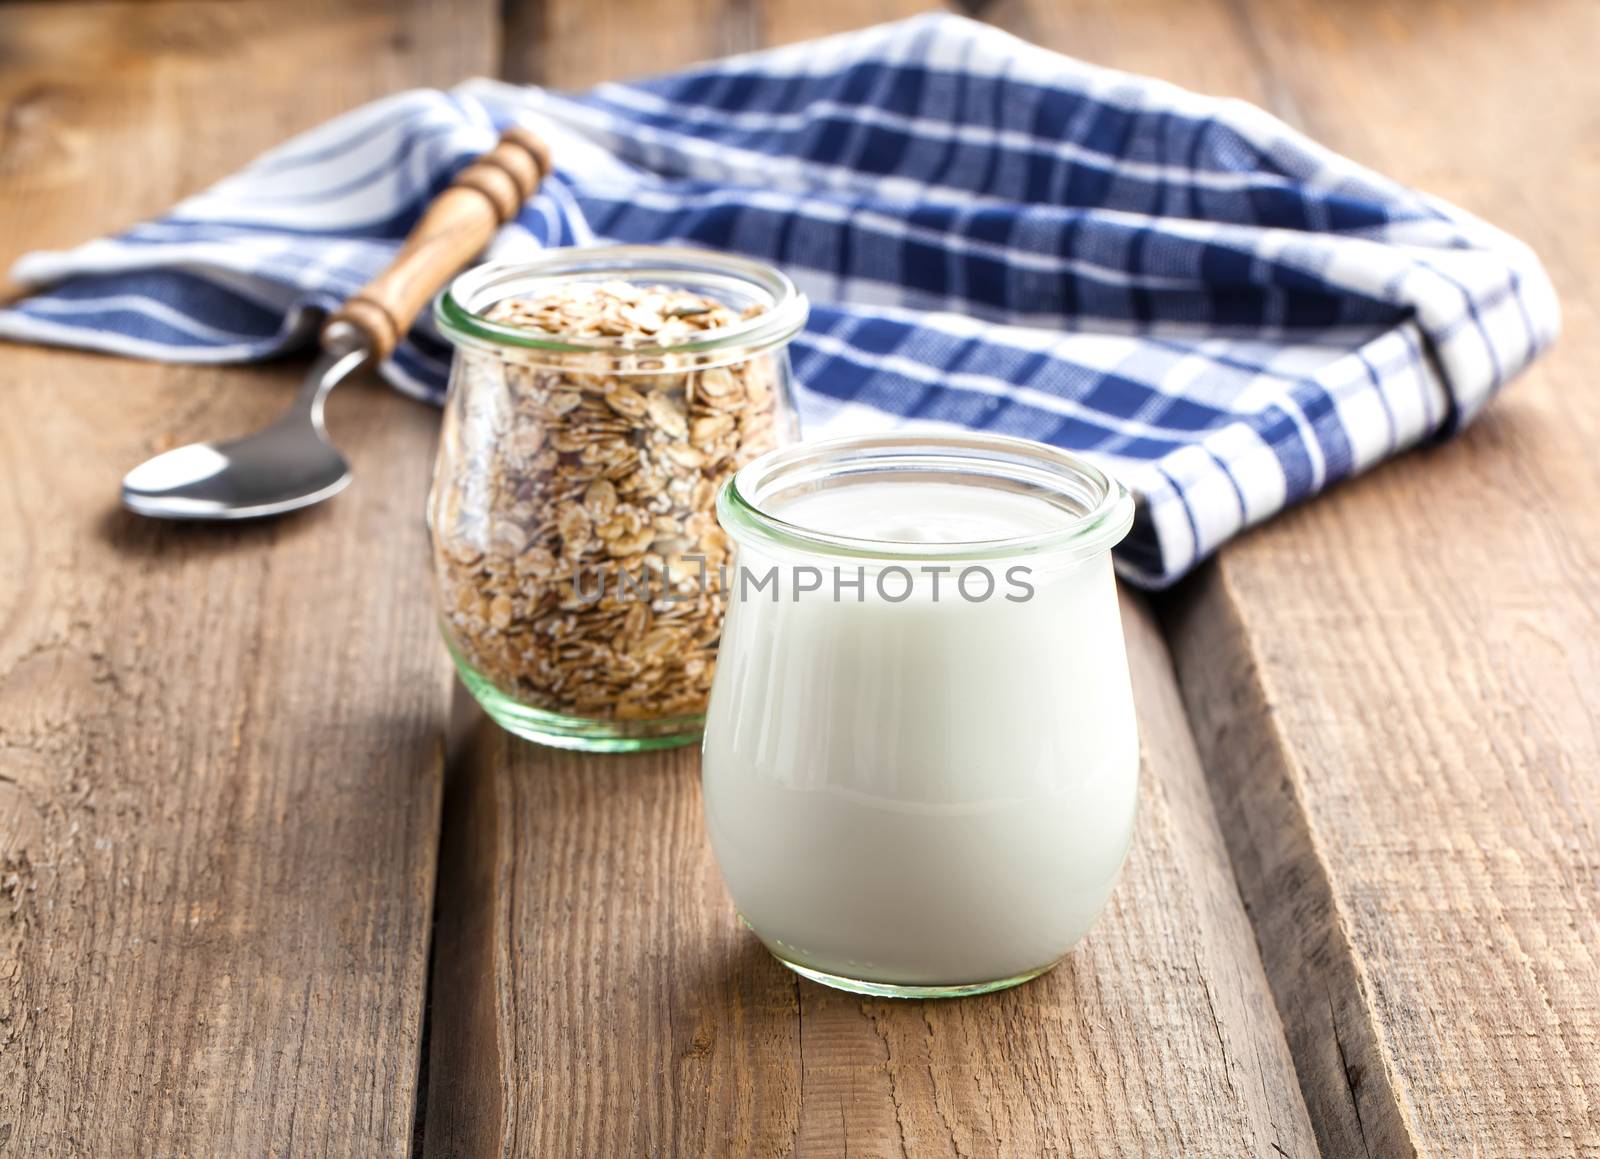 Delicious, nutritious and healthy yogurt in a glass jars with sp by motorolka